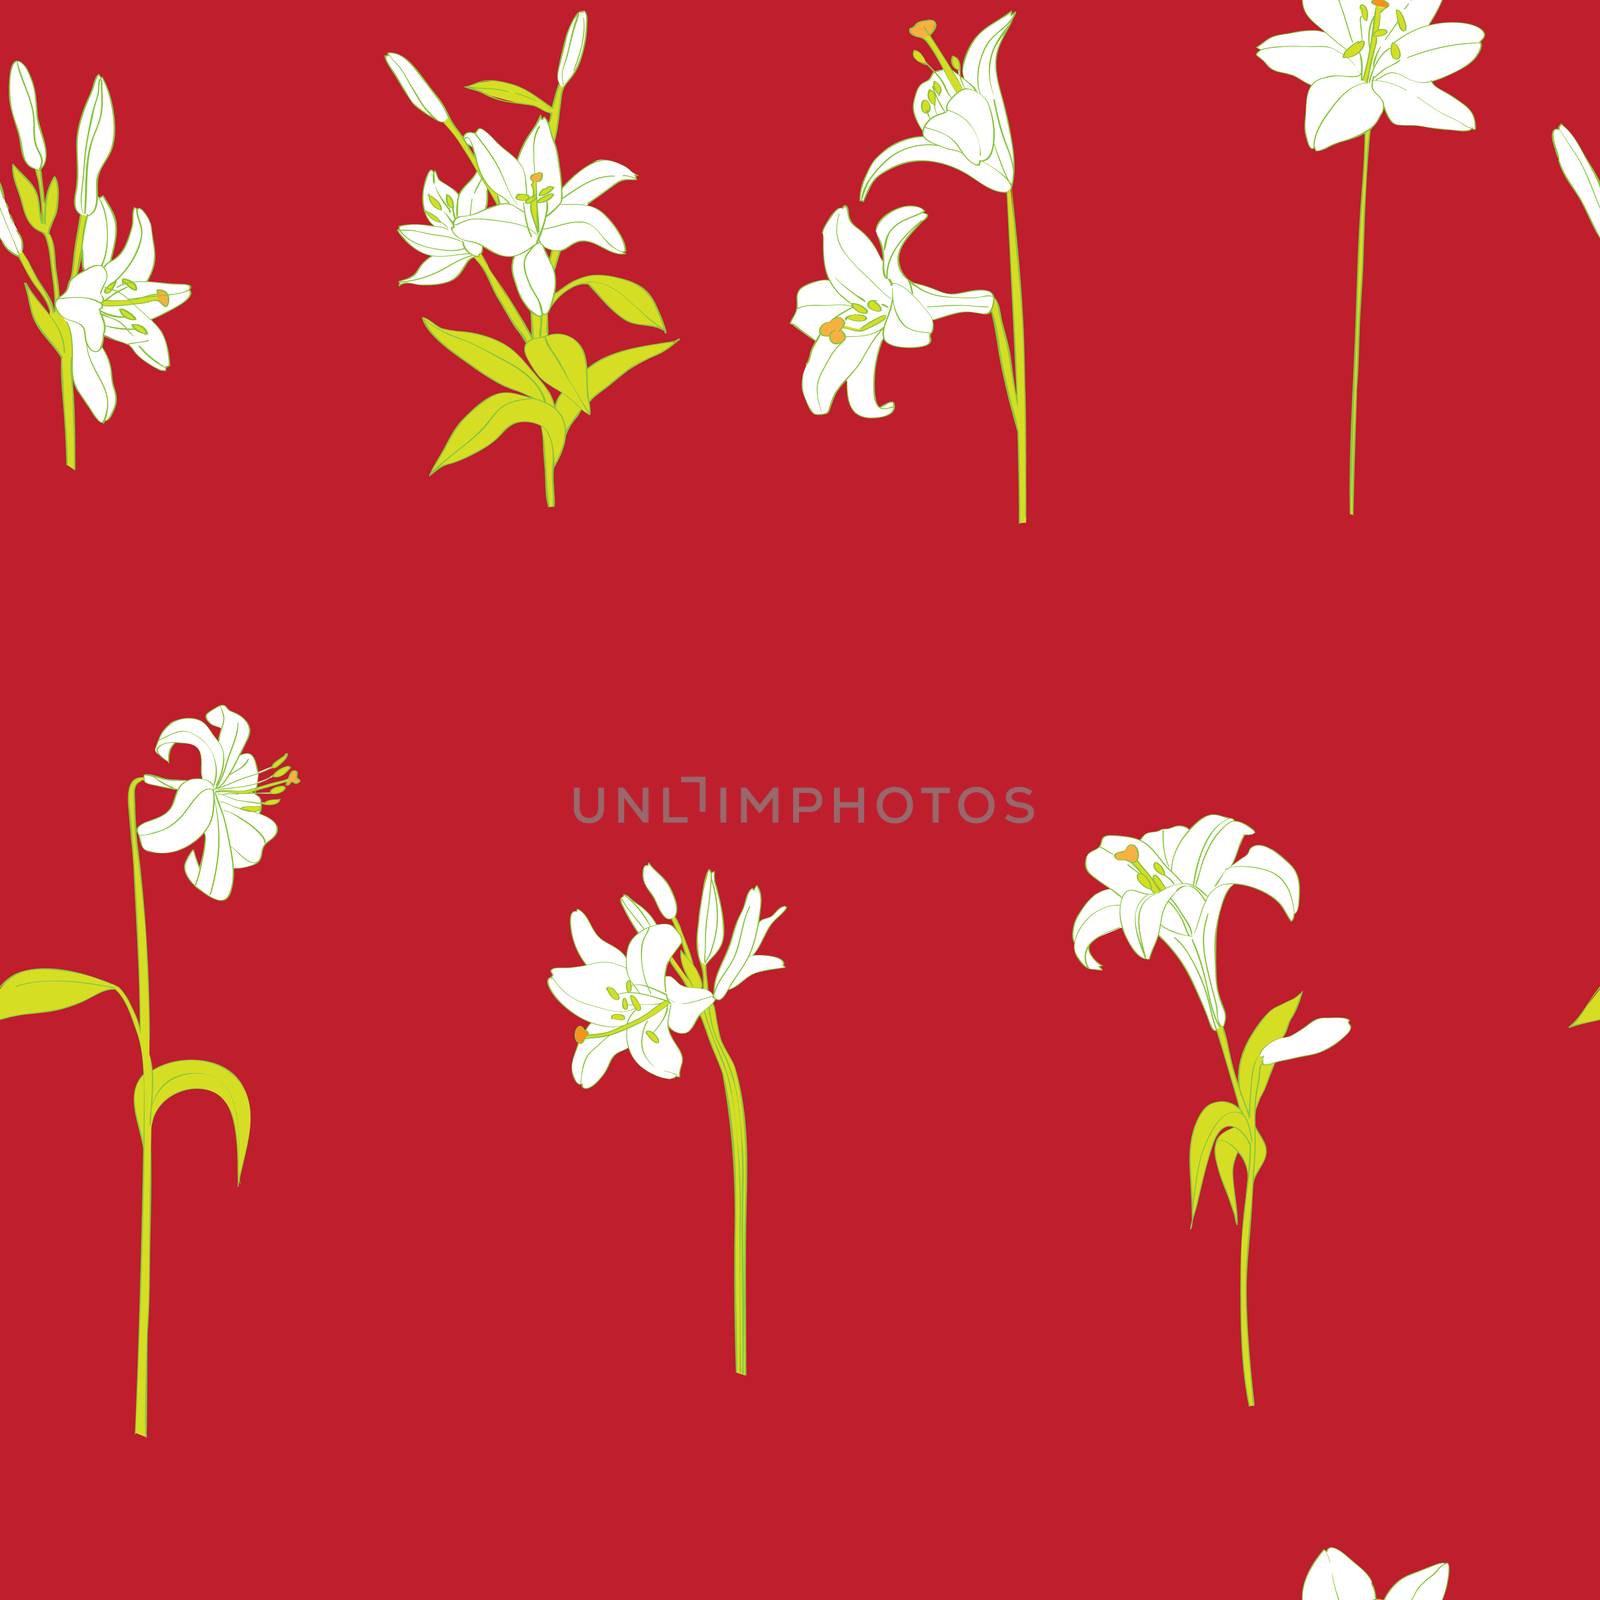 Lilies sparse pattern on a vibrant red background